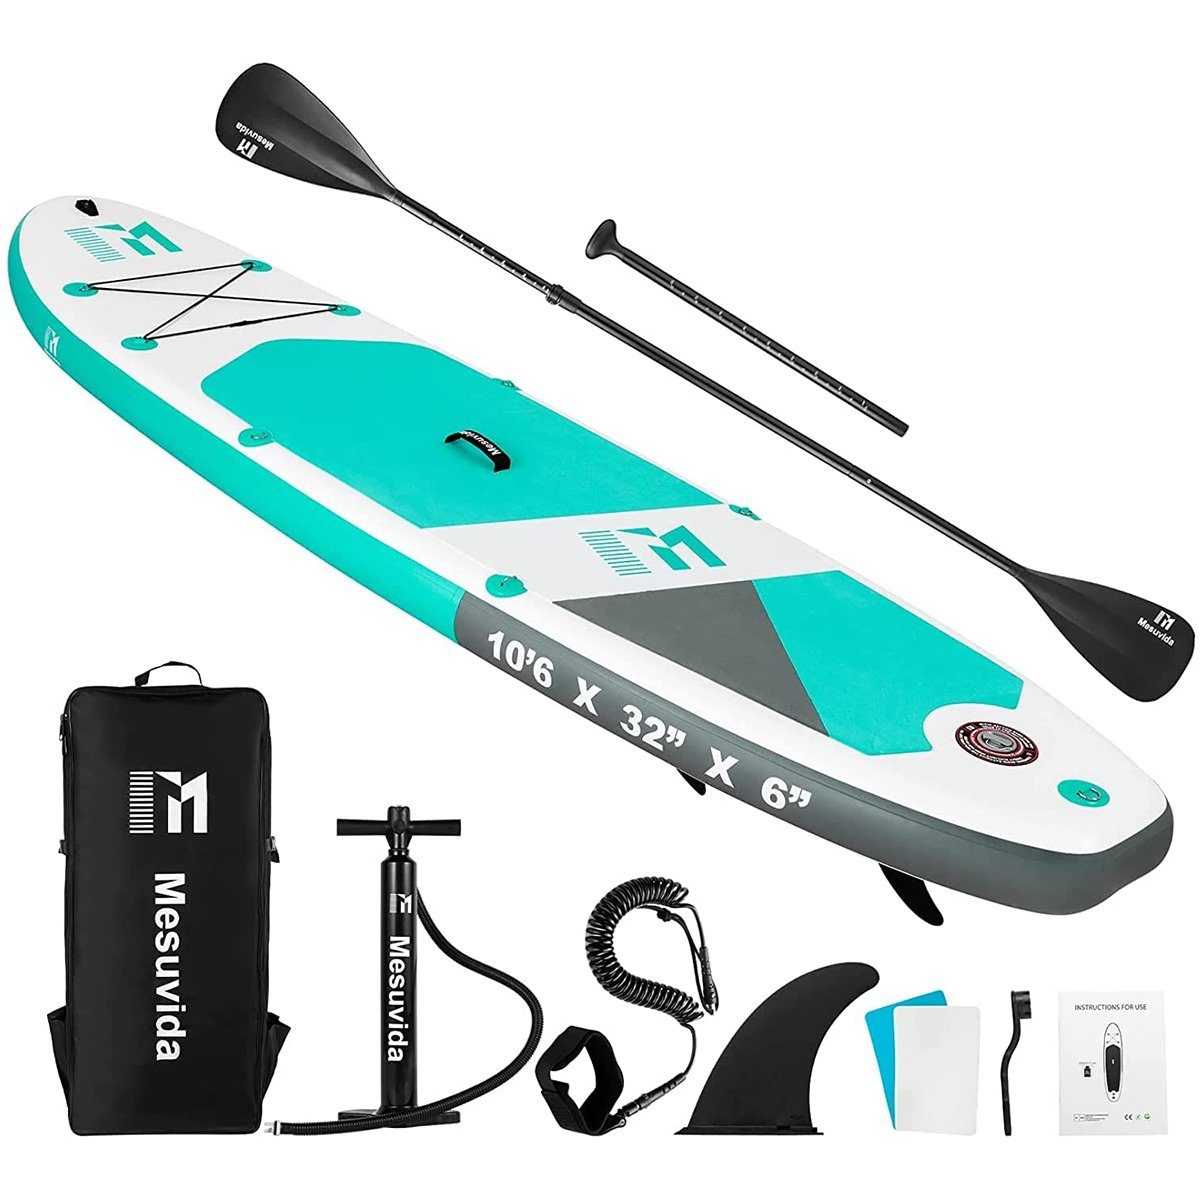 SUP Stand Up Paddle Board Surfboard Paddleboard Aufblasbar 305cm Pumpe Anfänger 